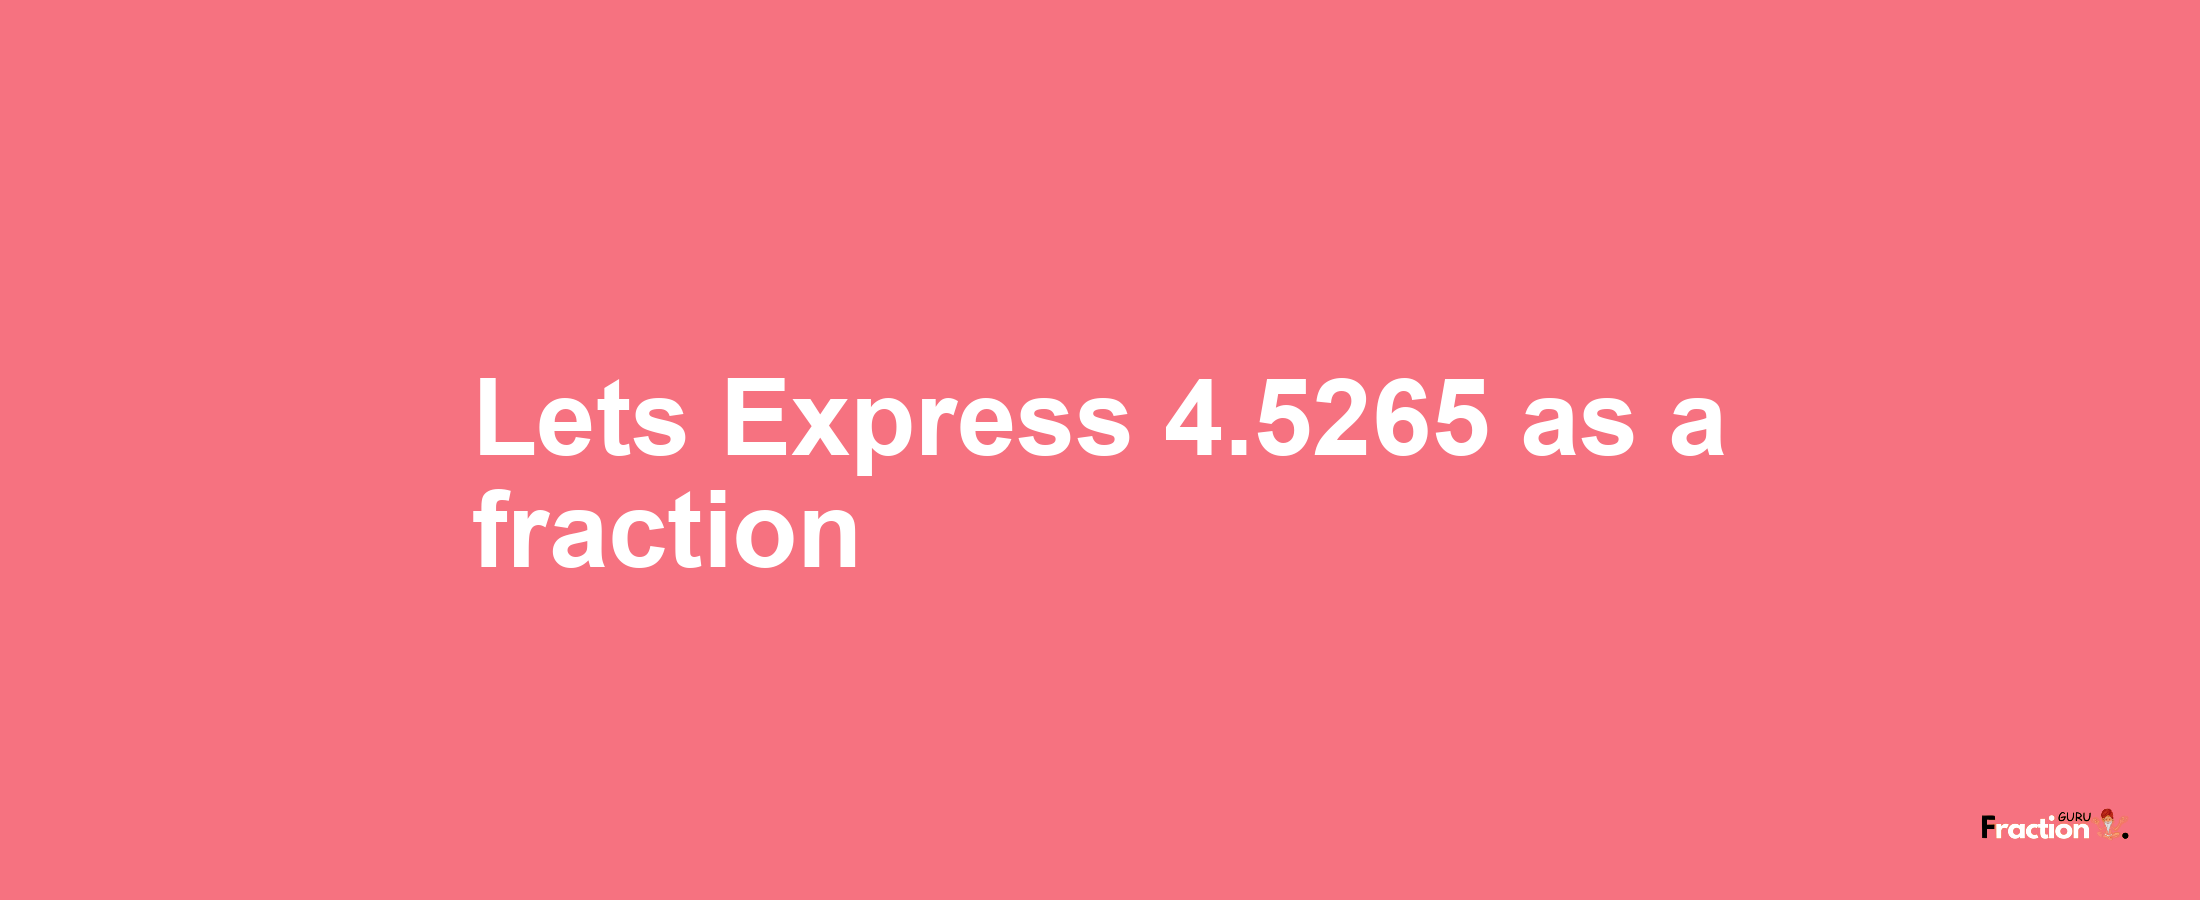 Lets Express 4.5265 as afraction